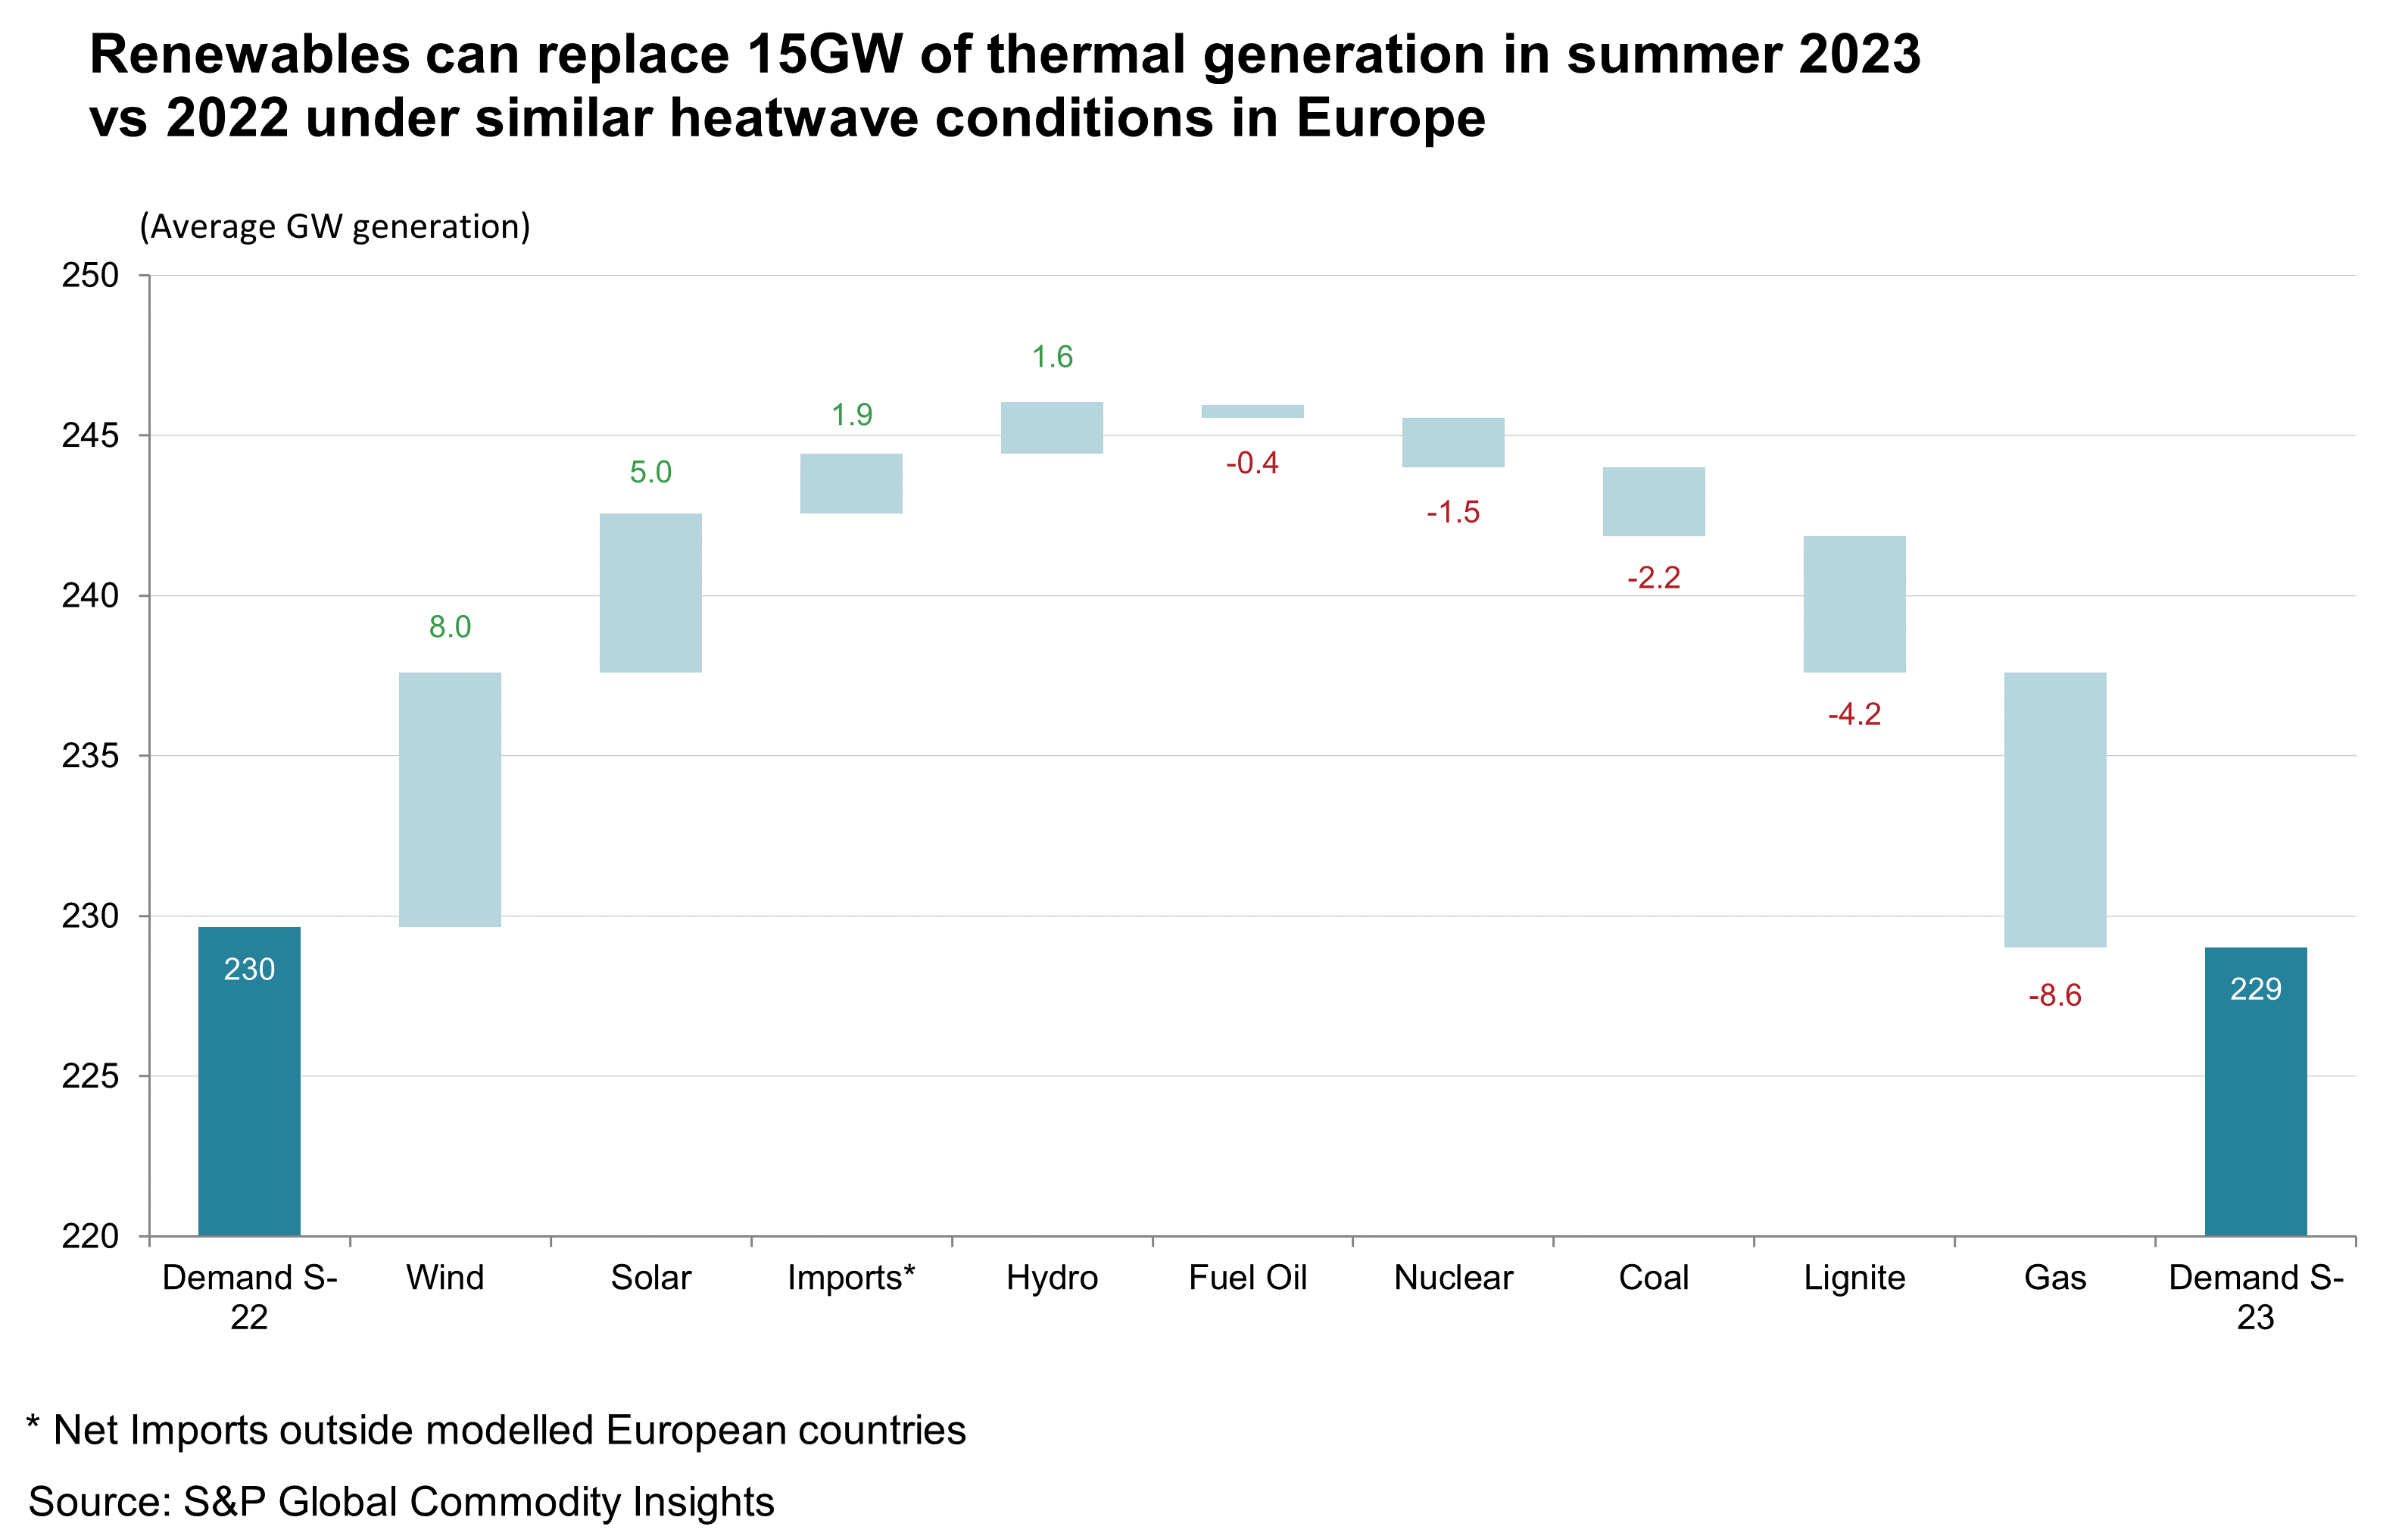 Renewables can replace 15GW of thermal generation in summer 2023 vs 2022 under similar heat wave conditions in Europe